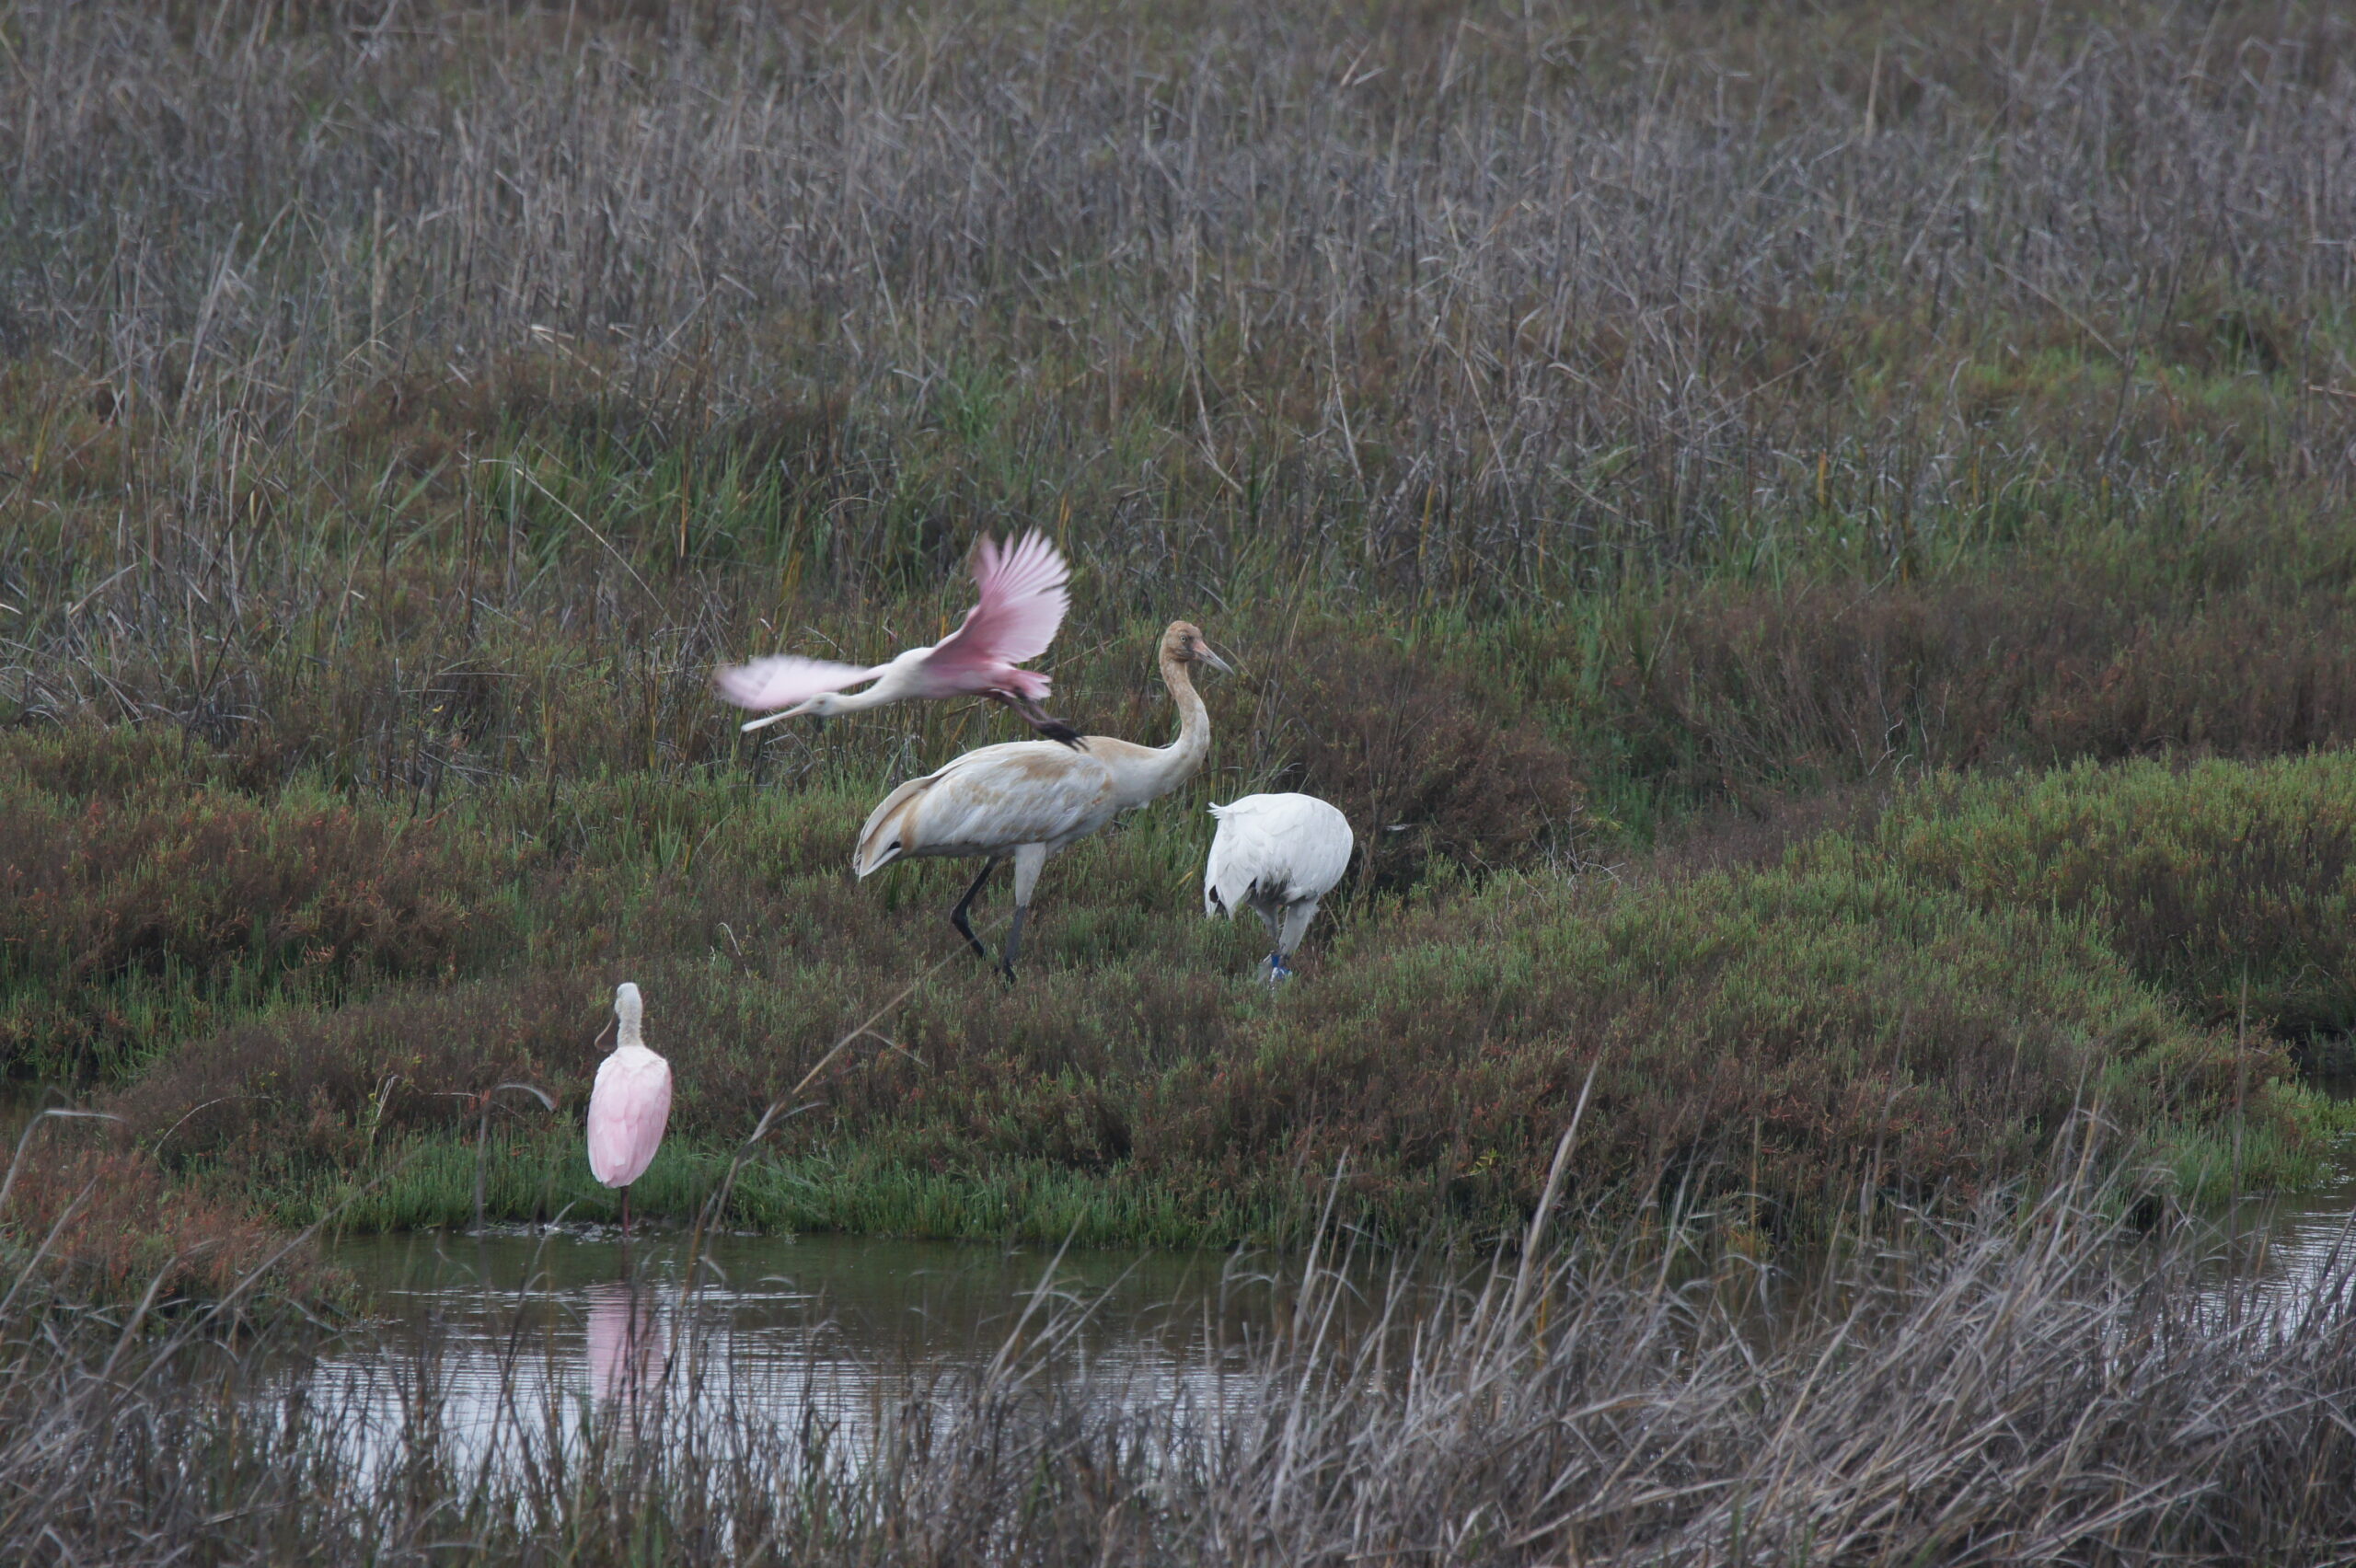 Whooping Crane adults with juveniles